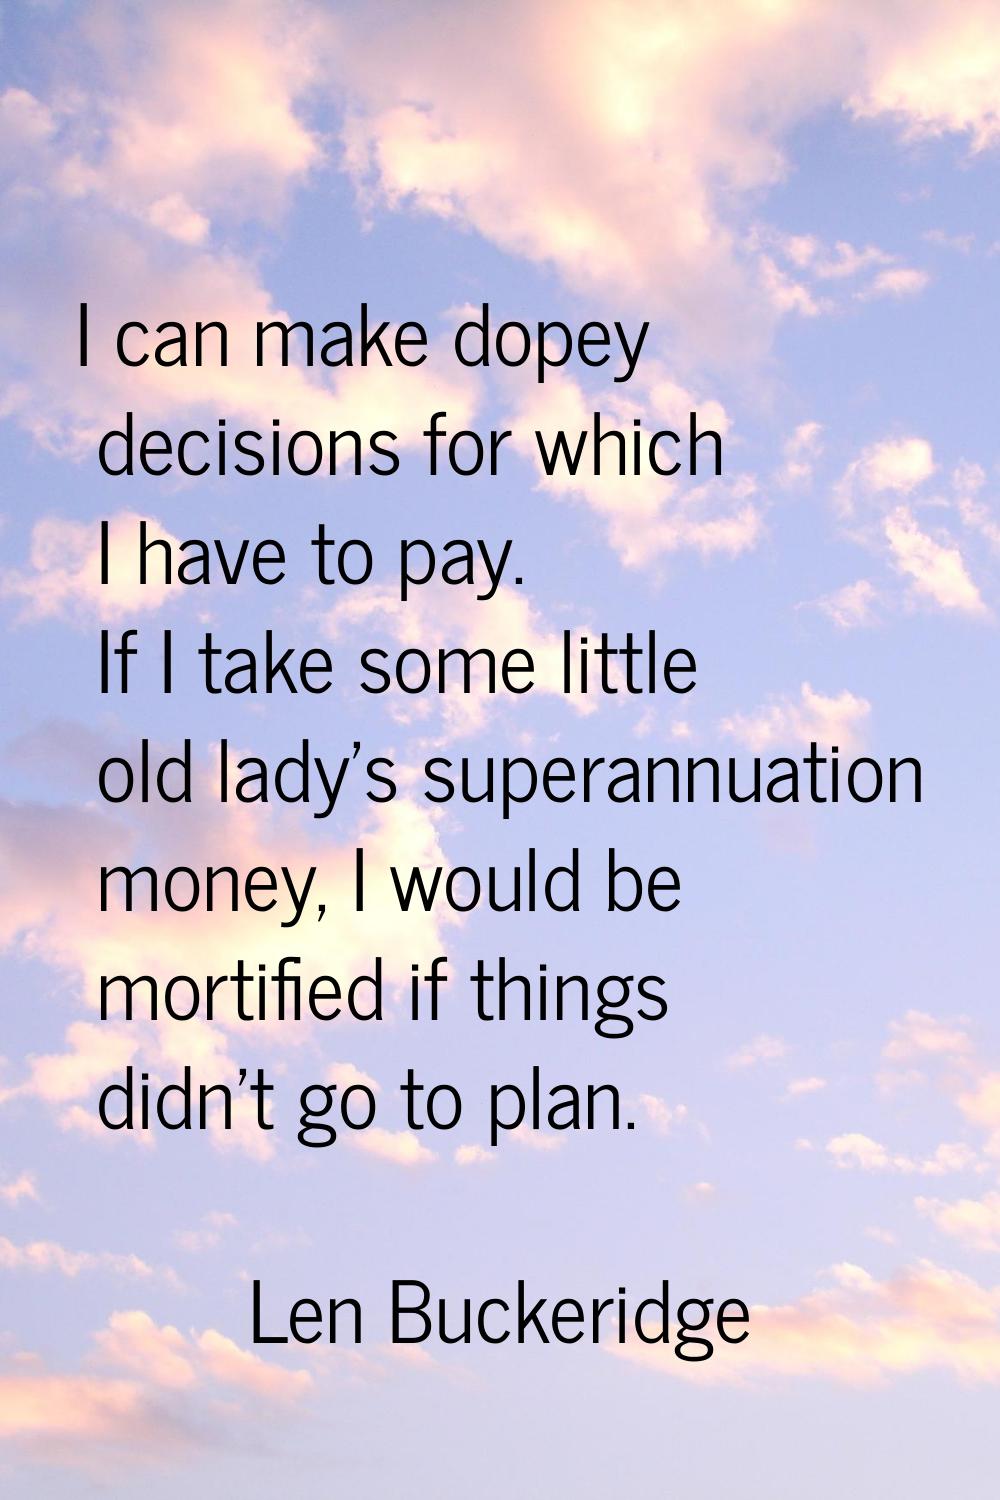 I can make dopey decisions for which I have to pay. If I take some little old lady's superannuation